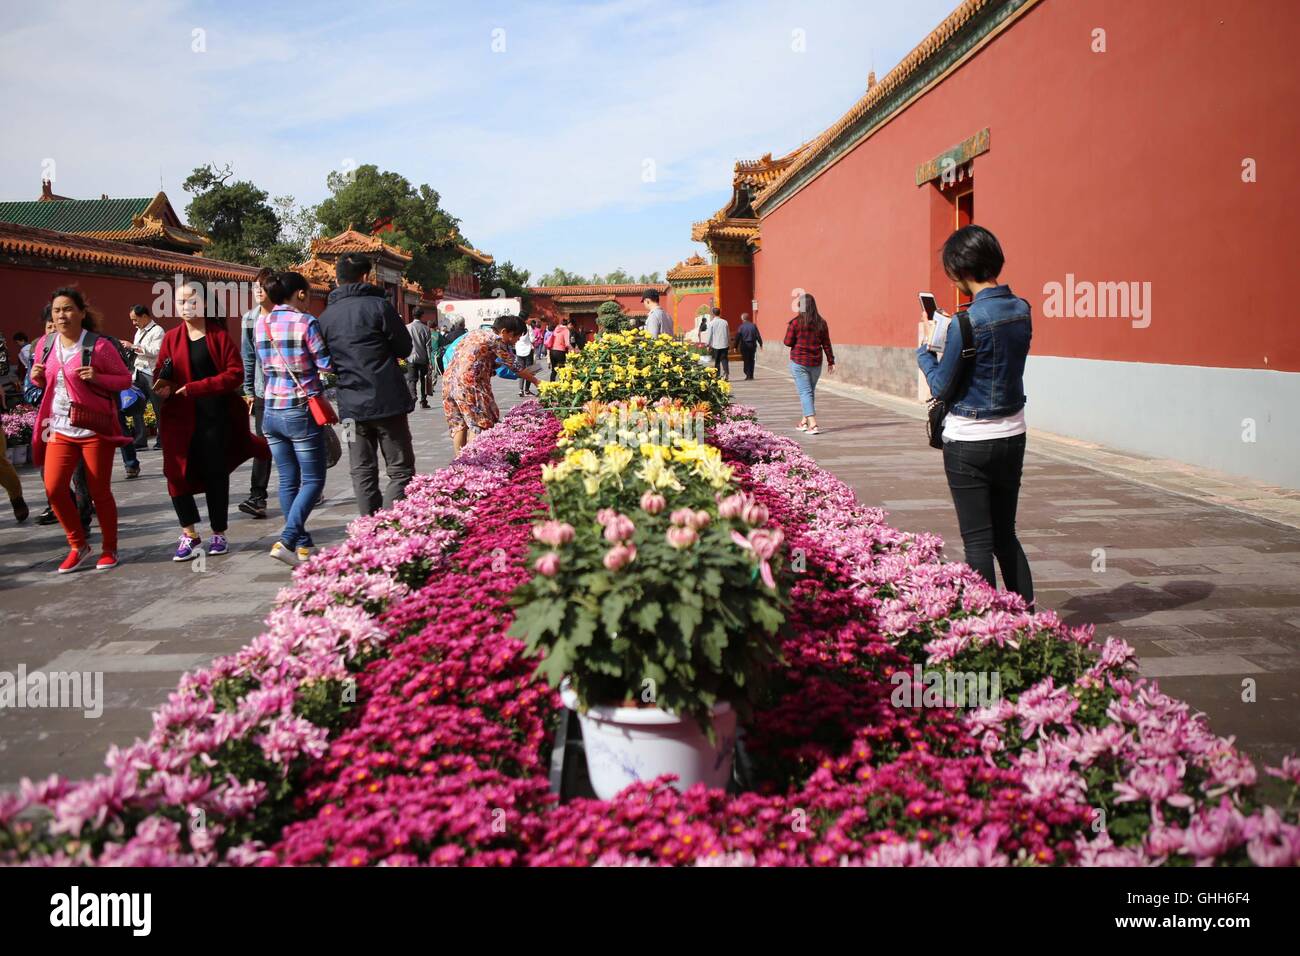 Beijing, Beijing, China. 27th Sep, 2016. Beijing, CHINA-September 27 2016:?(EDITORIAL?USE?ONLY.?CHINA?OUT) More than 30,000 pots of chrysanthemums from Kaifeng City are on display in the Palace Museum on September 27th, 2016, marking the upcoming National Day which falls on October 1st, 2016. The fine chrysanthemums of different kinds are showcased in the Forbidden City from September 27th to October 16th, 2016. Chrysanthemum from Kaifeng City, central ChinaÂ¡Â¯s Hunan Province, is regarded as the first-level chrysanthemum in China. © SIPA Asia/ZUMA Wire/Alamy Live News Stock Photo